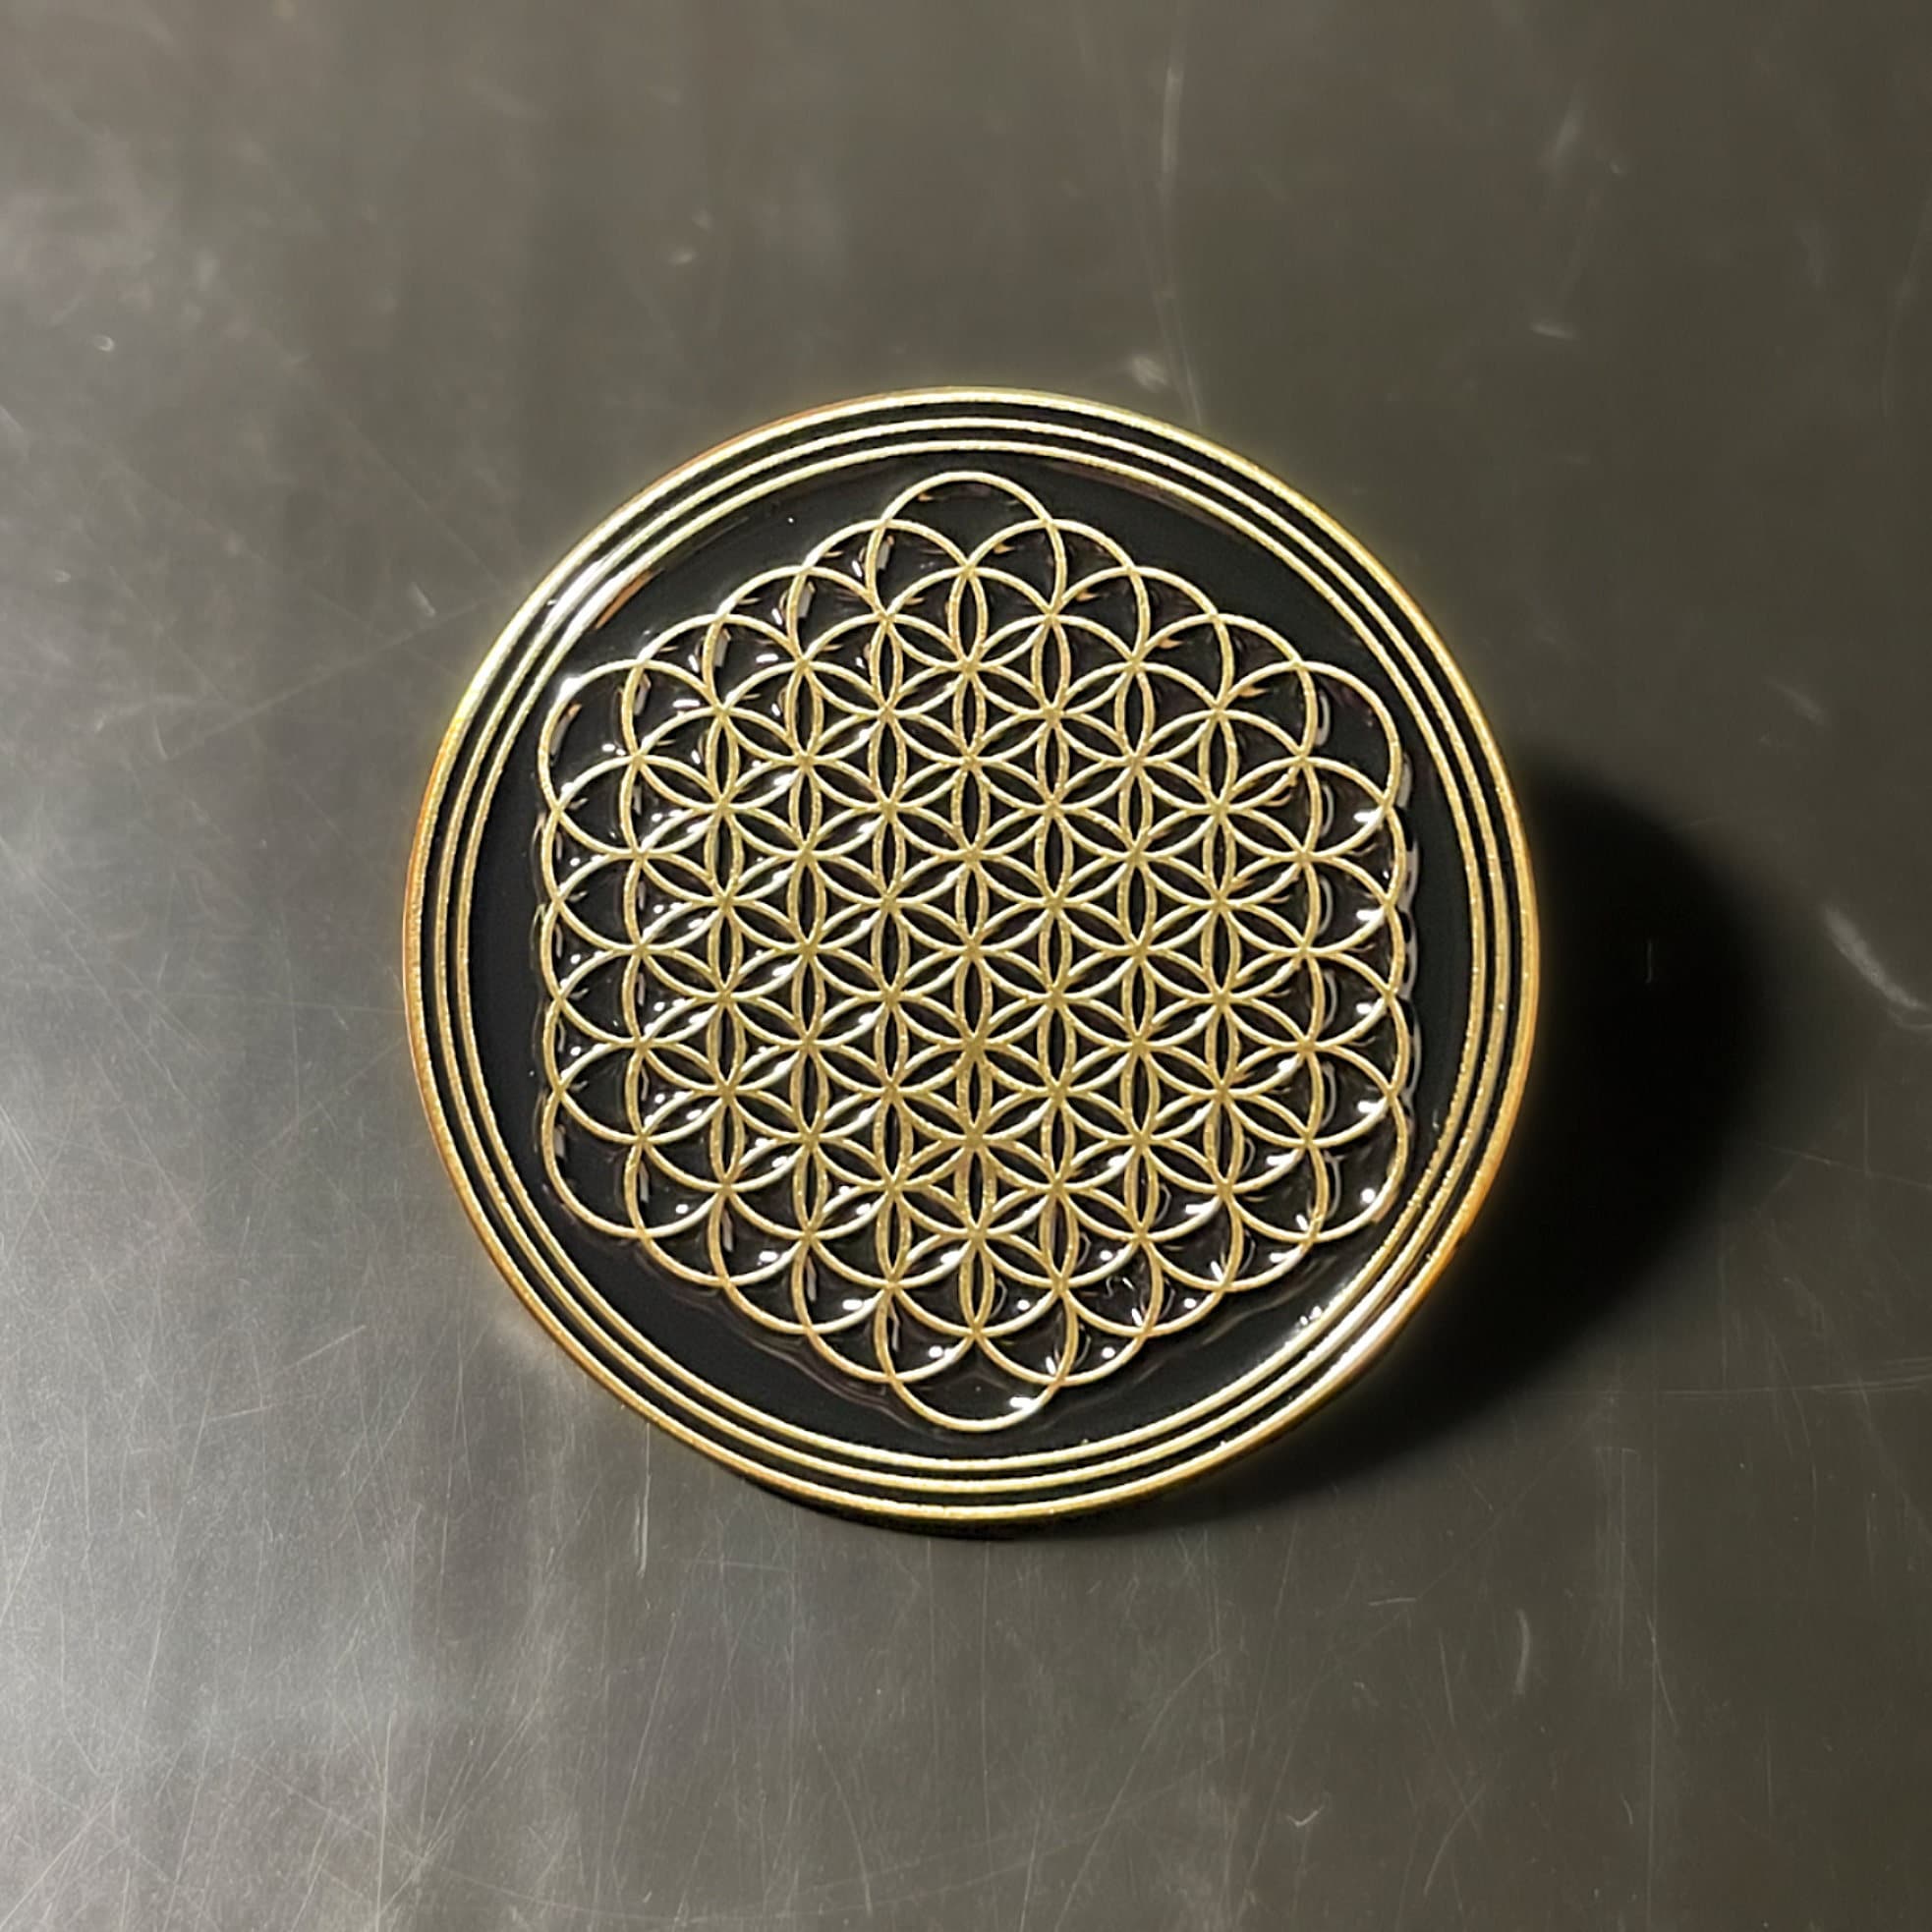 Bring Me The Horizon Crooked Young Back Patch Sew On Official Badge Album  Band